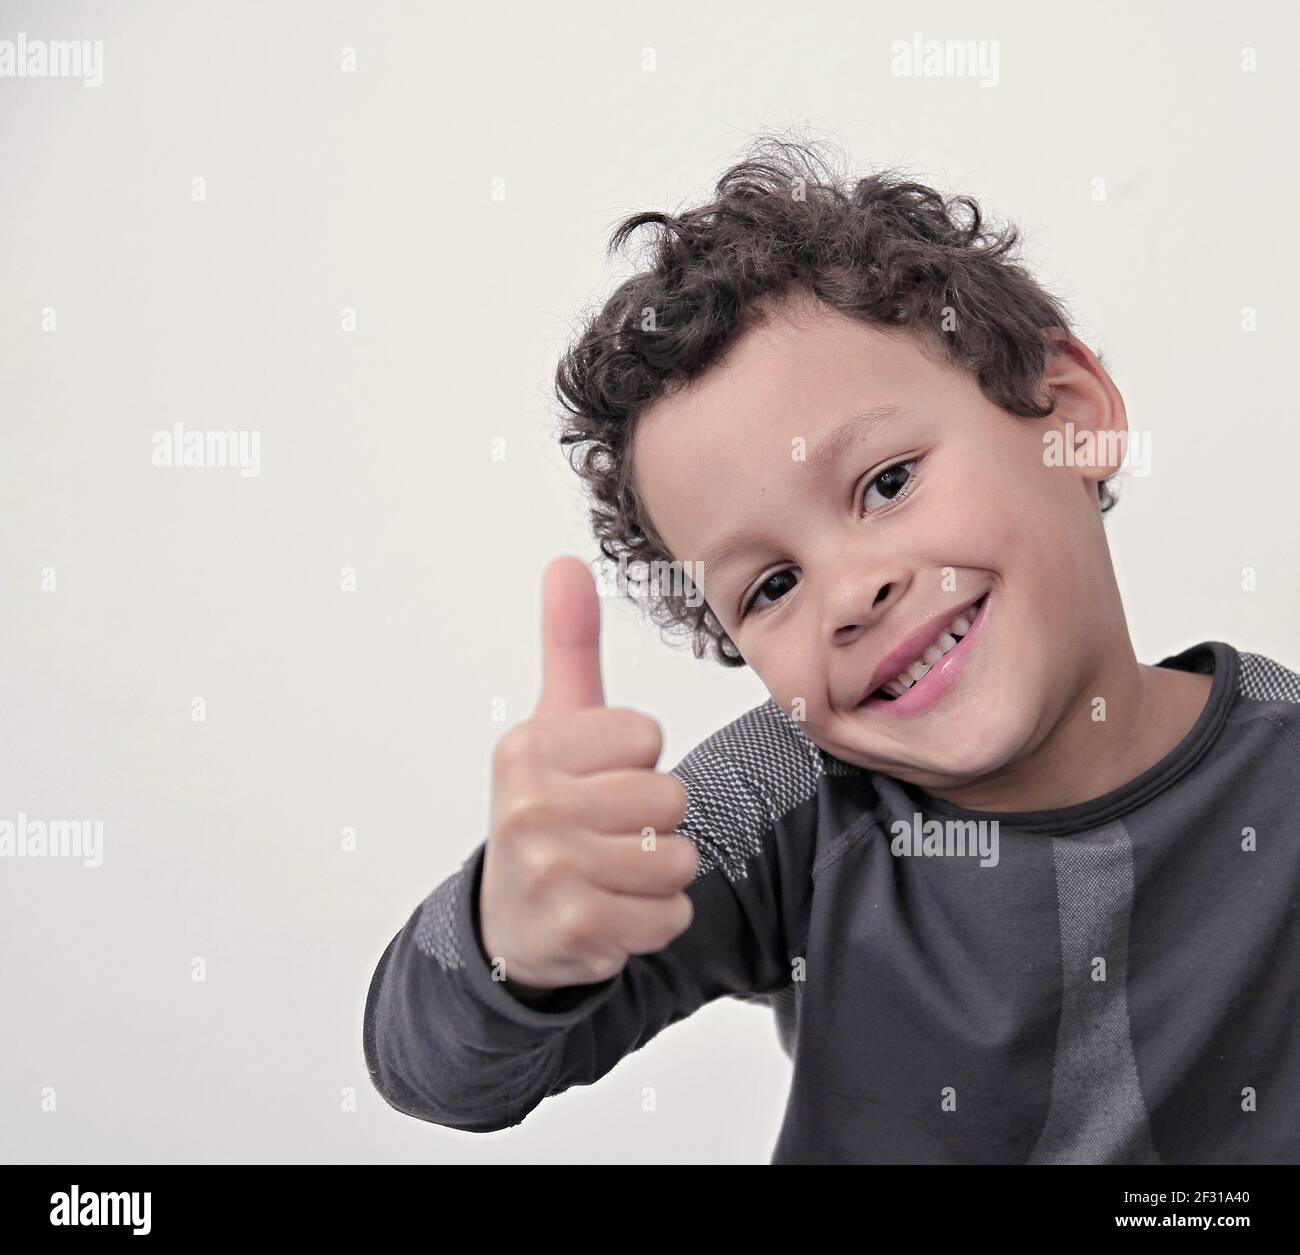 boy with thumbs up gesture on grey background with people stock photos Stock Photo